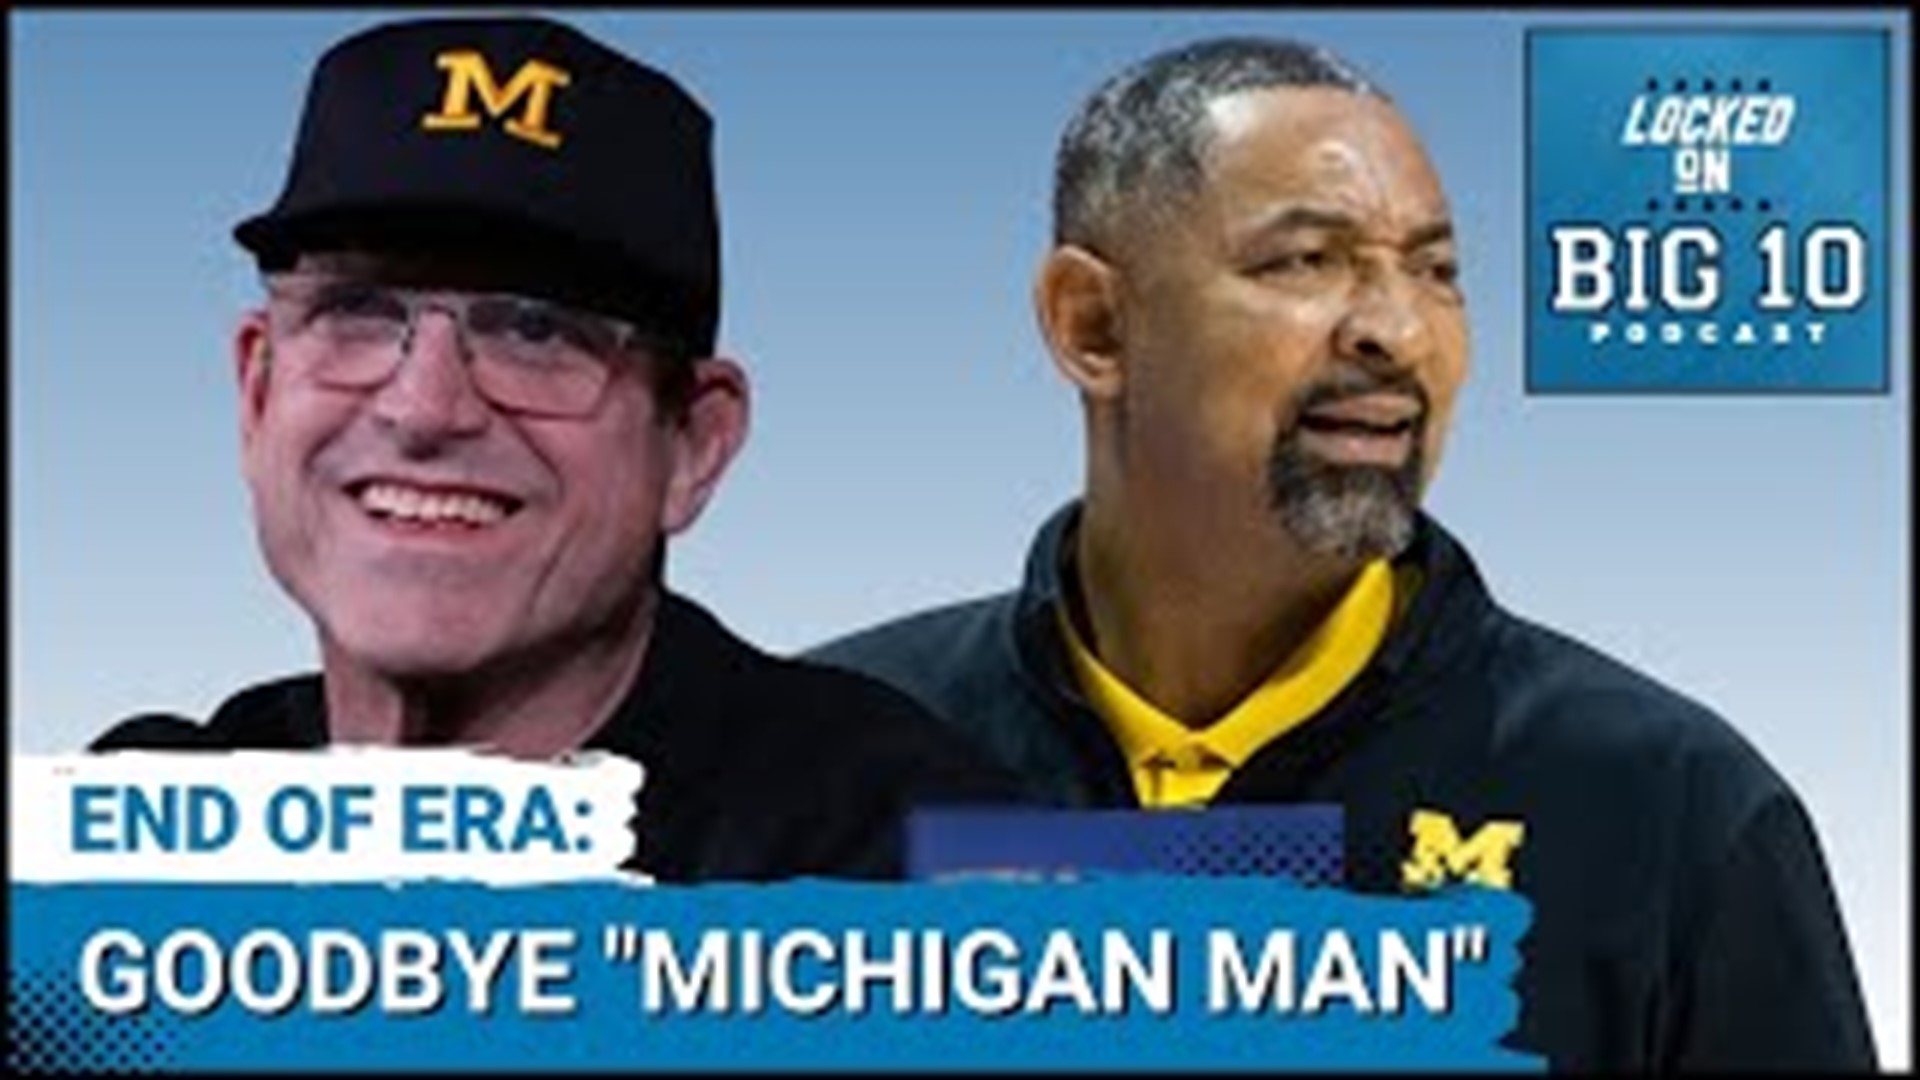 Are the Michigan Wolverines done with the idea that only a Michigan Man can coach at Michigan?  True Michigan Men Jim Harbaugh and Juwan Howard are gone.